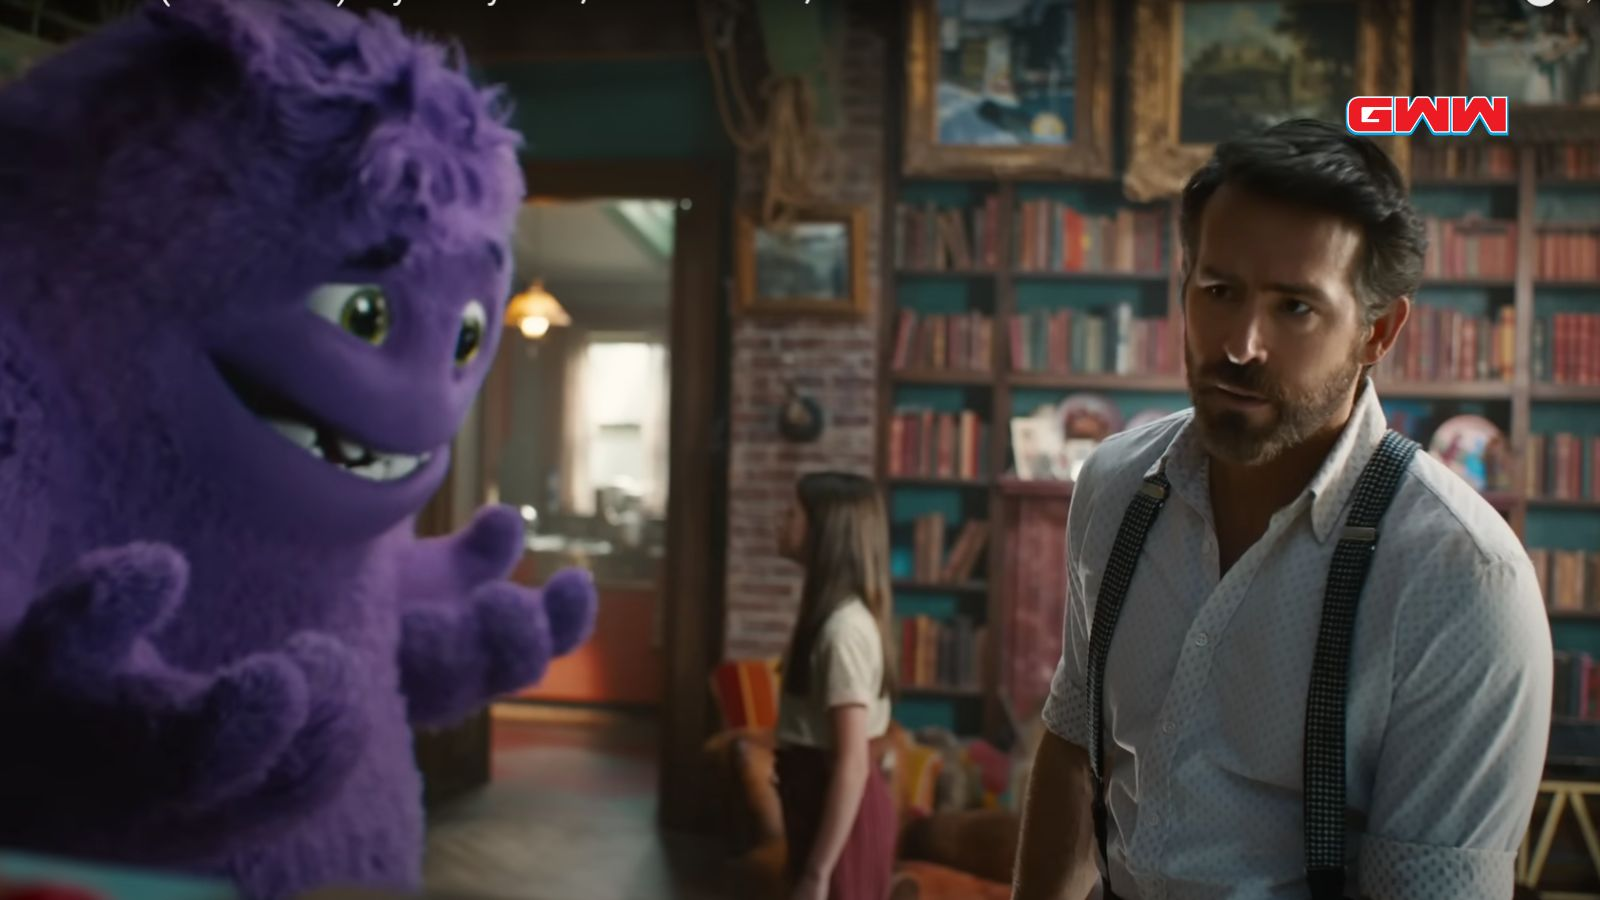 Blue talking to Cal played by Ryan Reynolds, IF movie